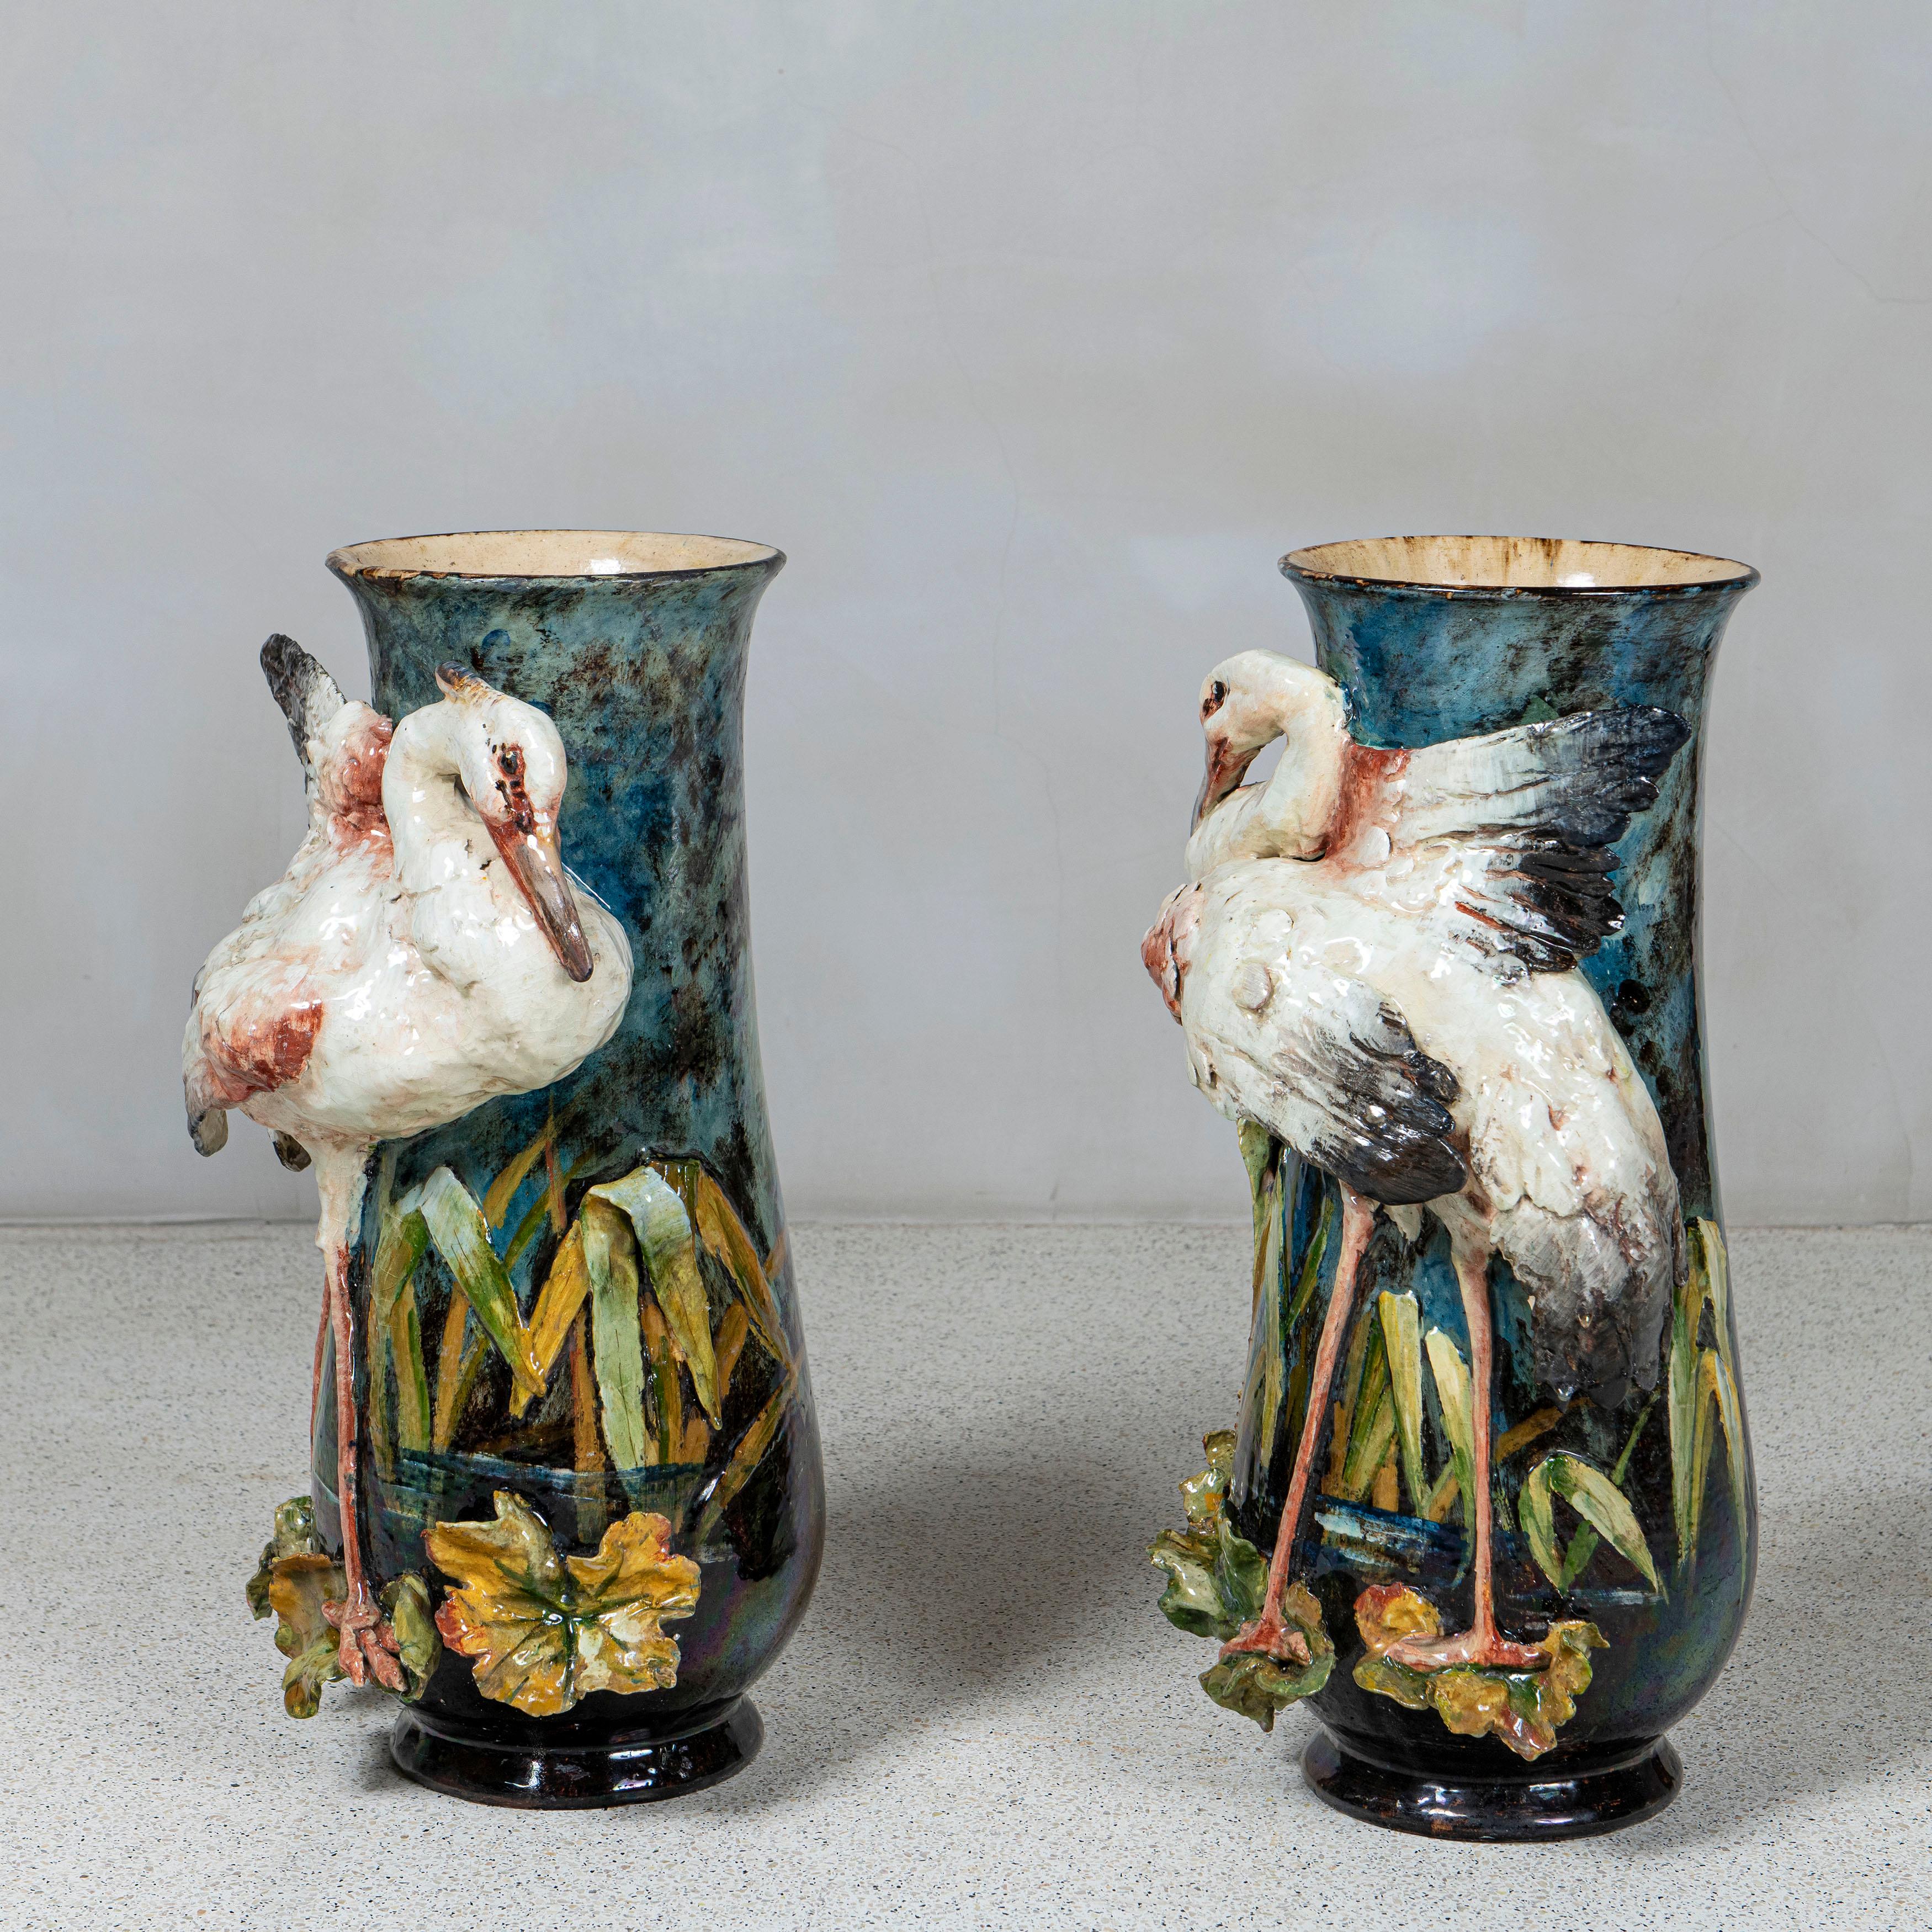 Pair of Glazed ceramic Barbotine vases with heron and flowers, France, circa 1890.